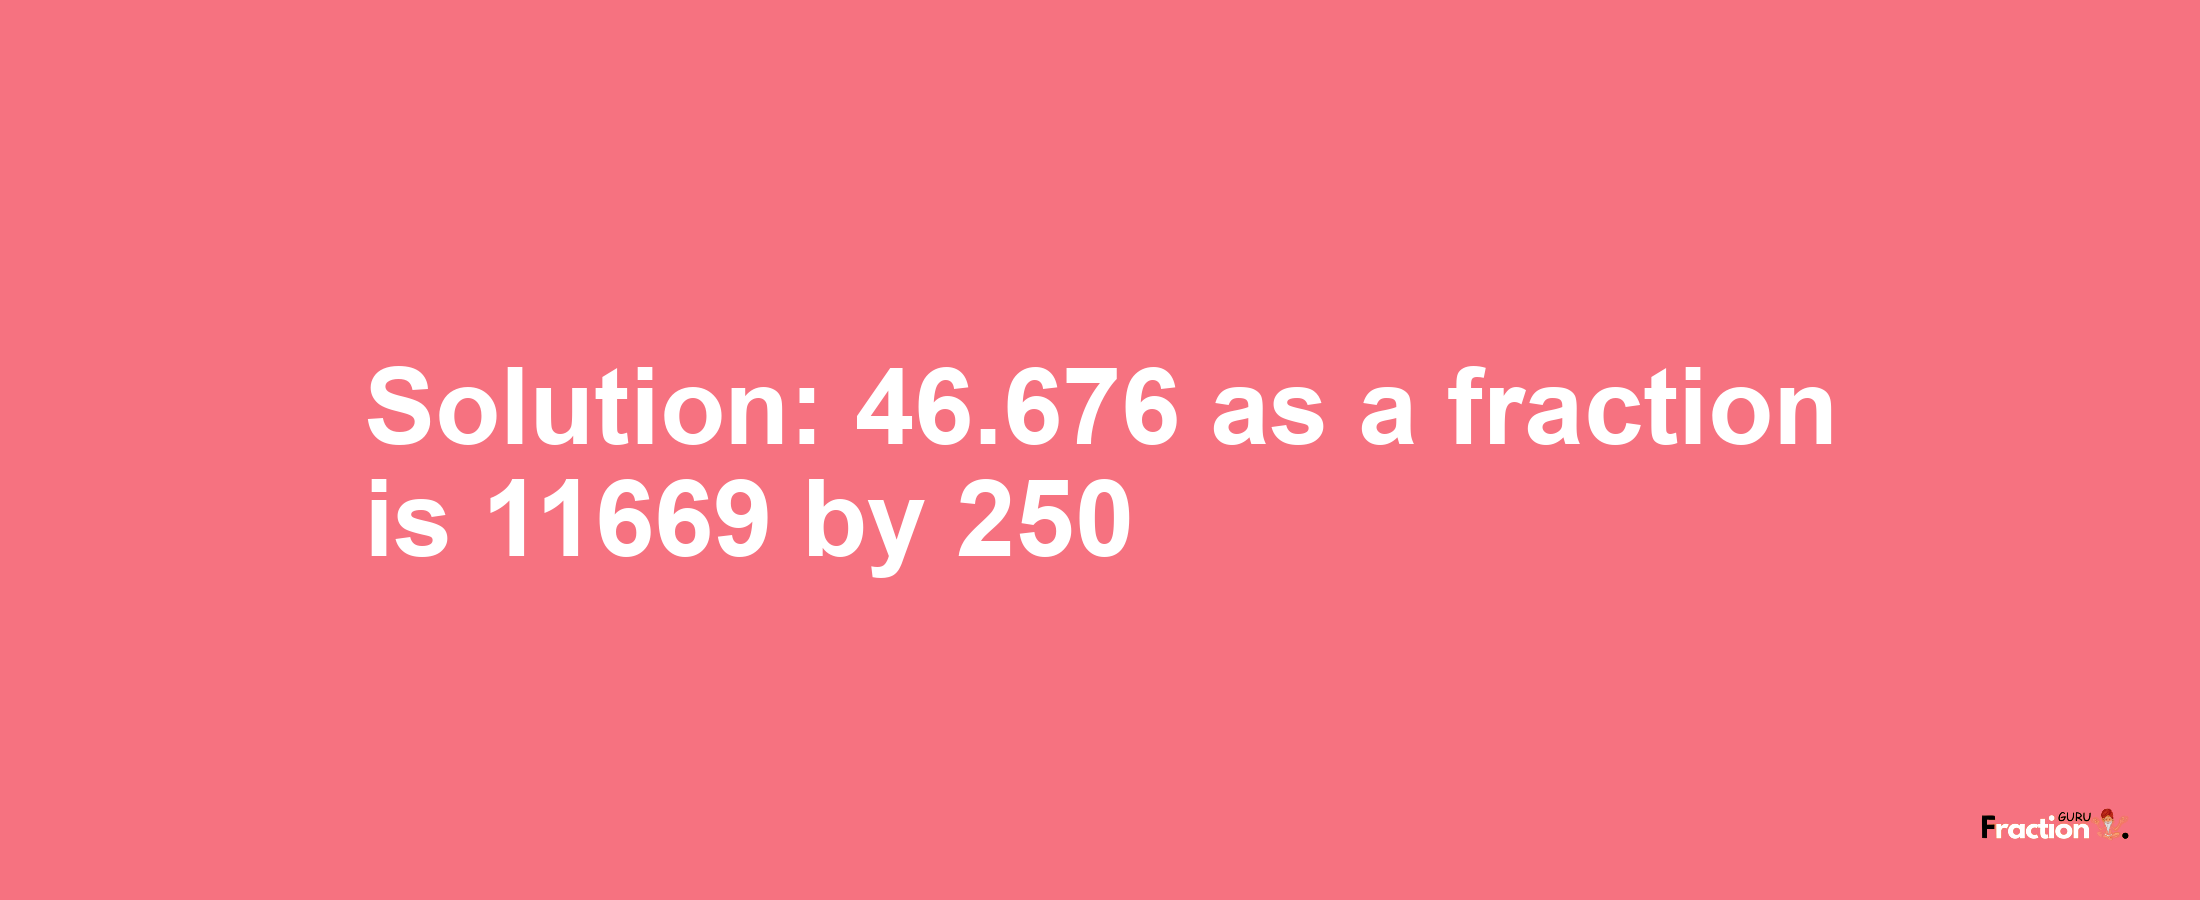 Solution:46.676 as a fraction is 11669/250